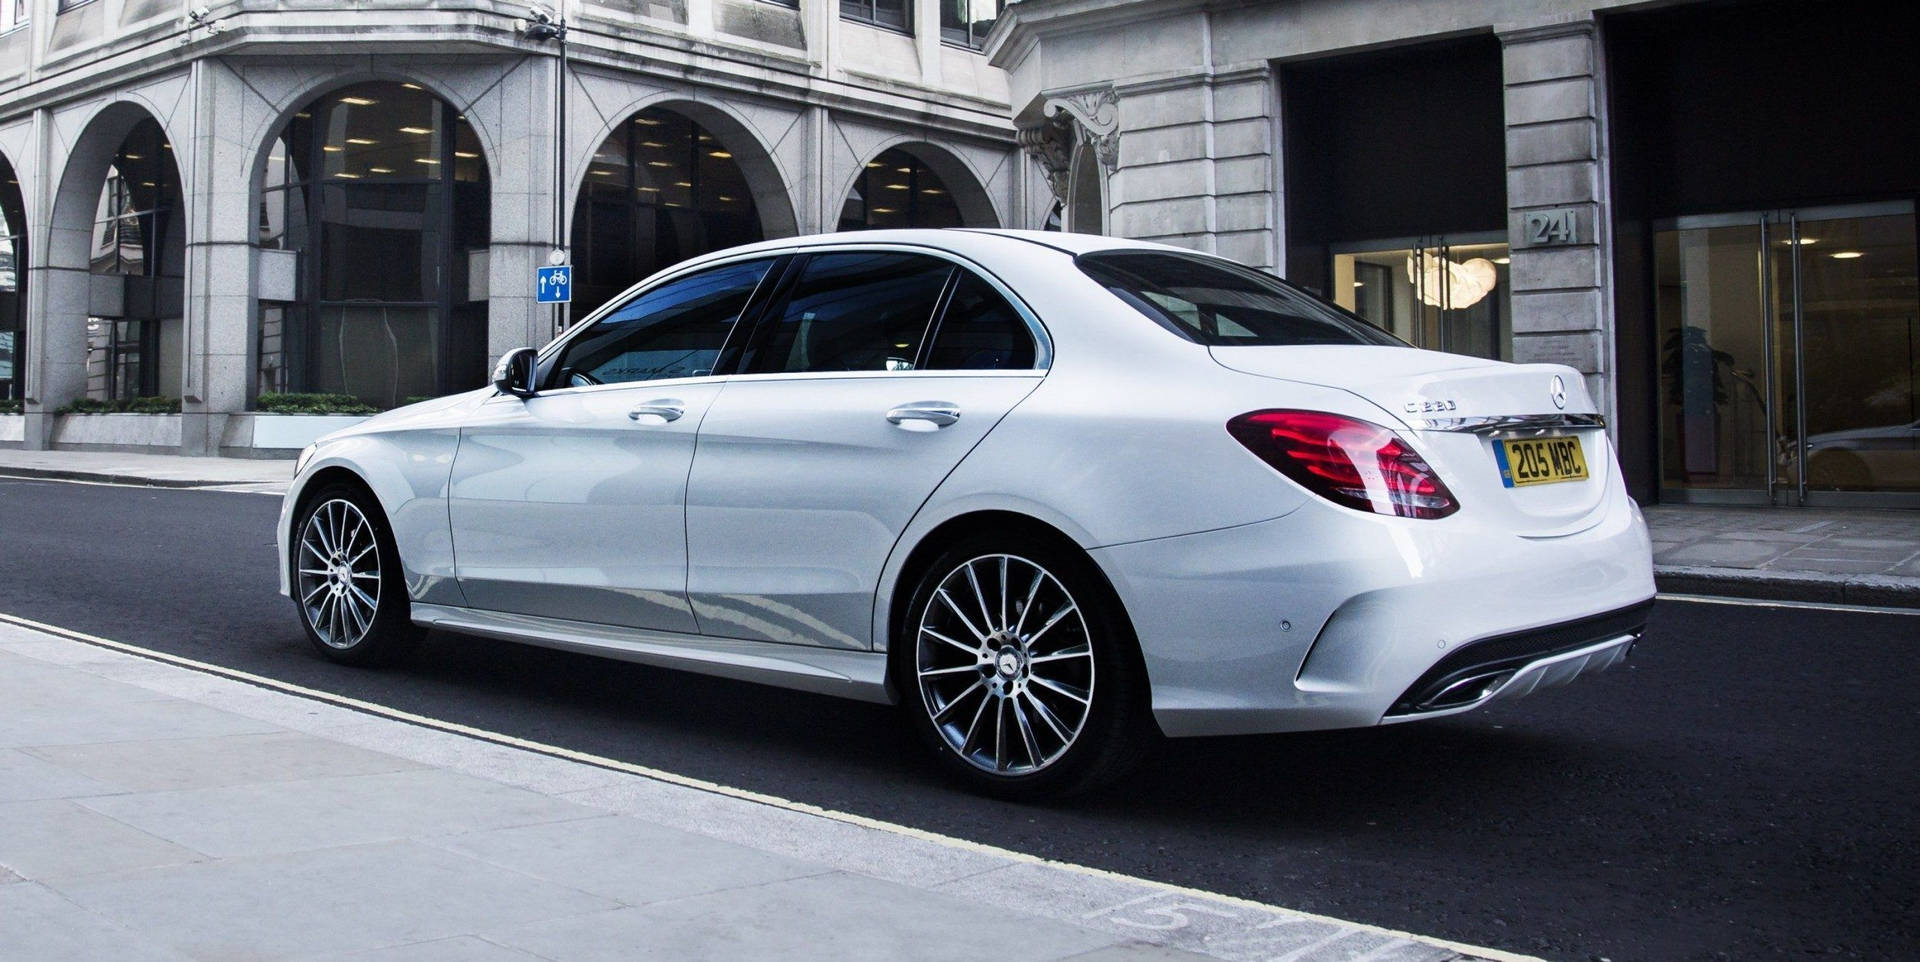 Majestic Mercedes Benz C300 On The Move